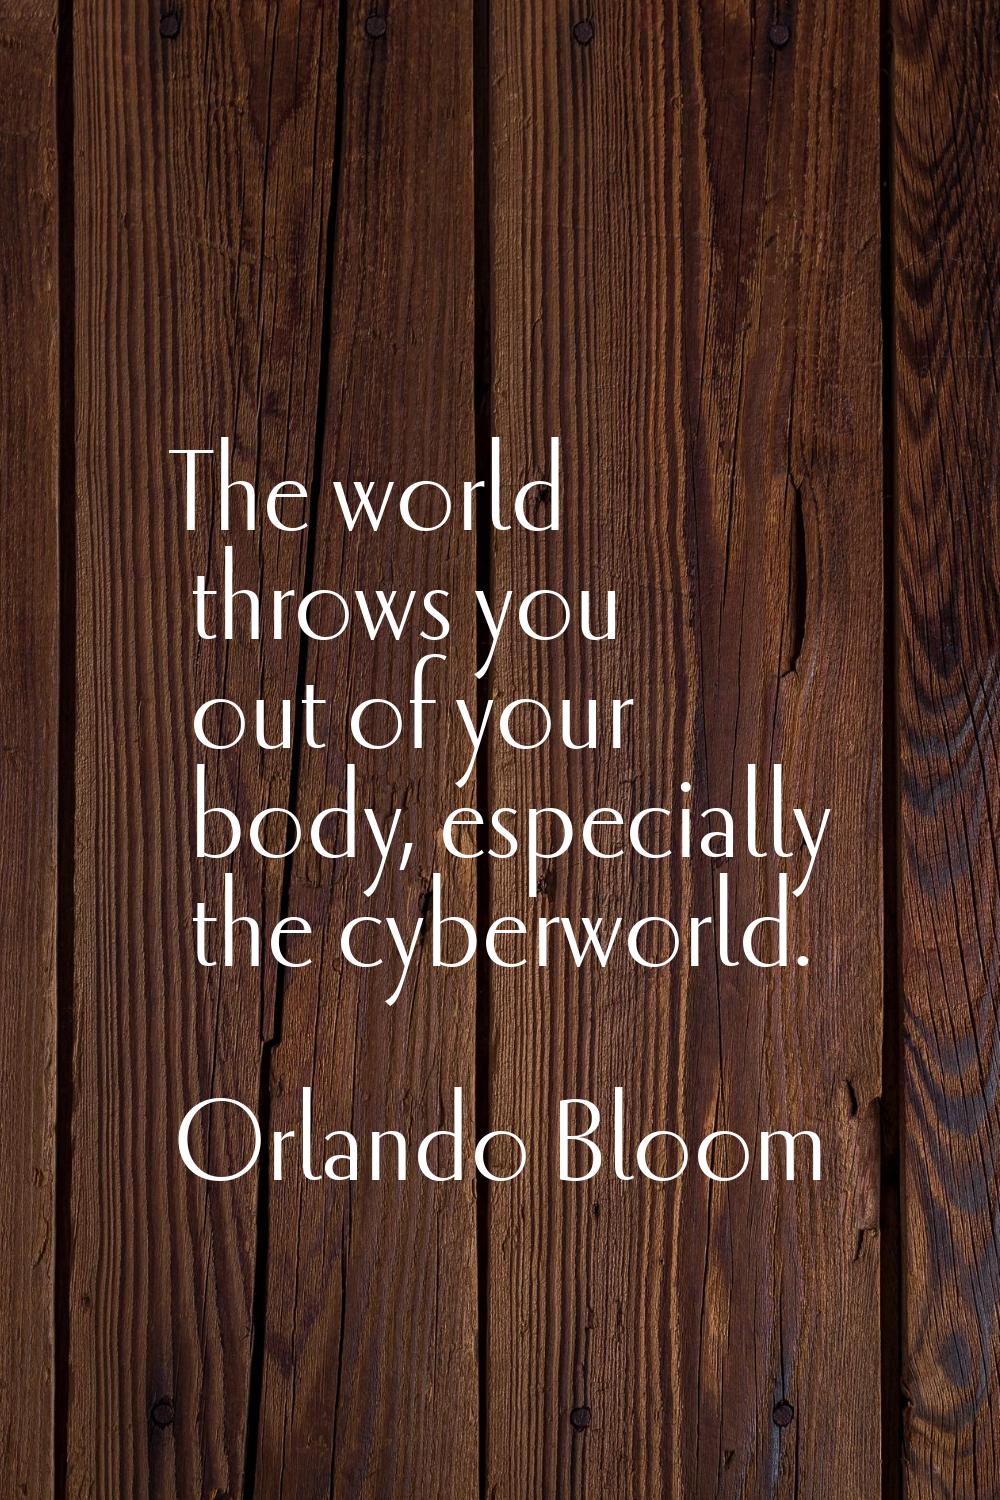 The world throws you out of your body, especially the cyberworld.